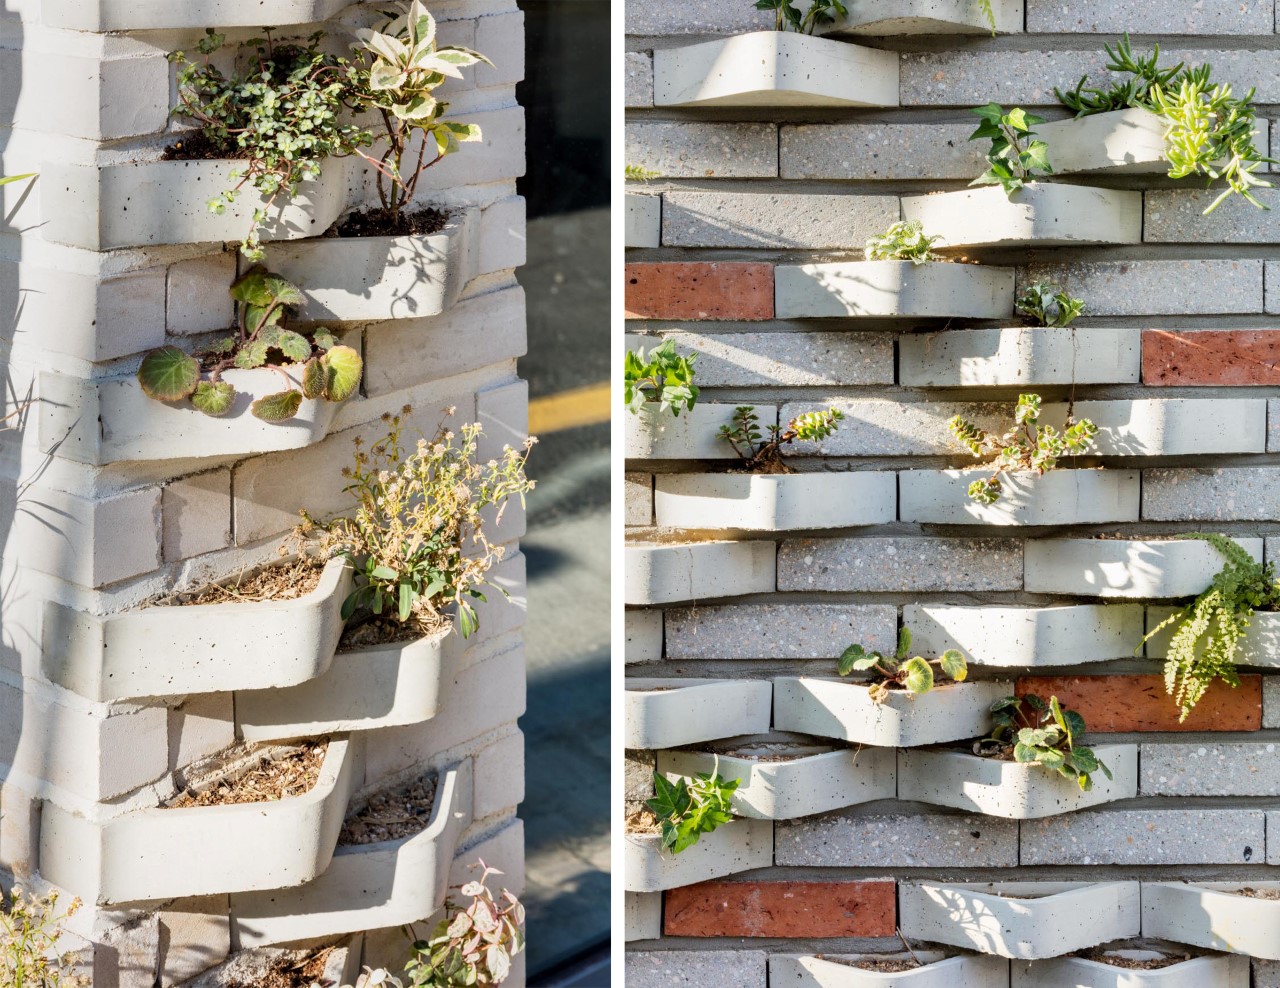 Creative brick design with a built-in planter turns the outer facade of ...